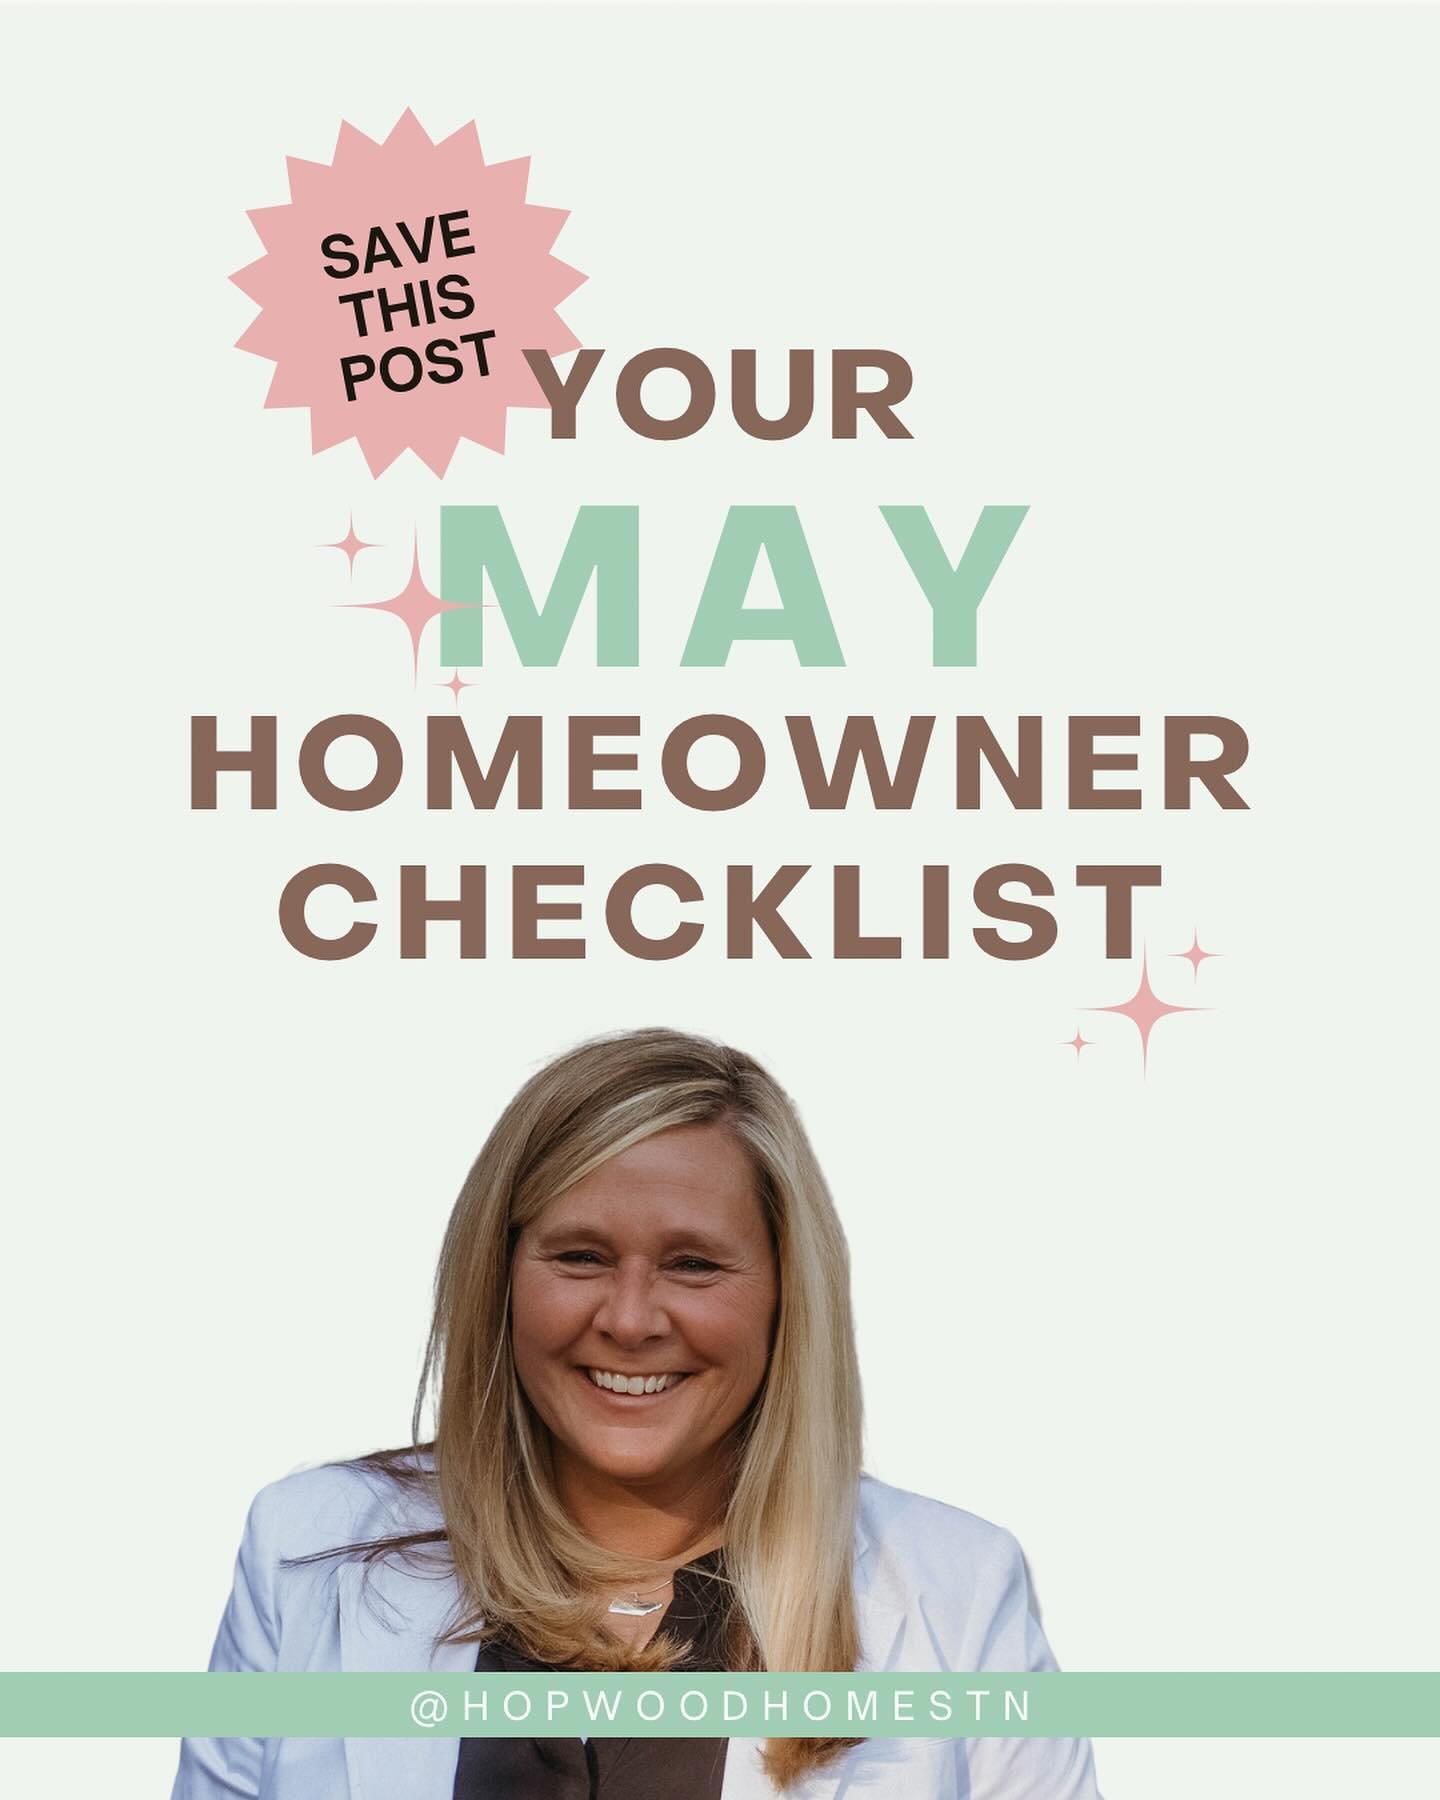 Homeowner? Party of one? Your checklist is ready. 💁🏼&zwj;♀️

This might be my favorite homeowner checklist of the year, and not because there&rsquo;s anything fun on it like &ldquo;make pickleball court in your driveway&rdquo; or &ldquo;start a nei